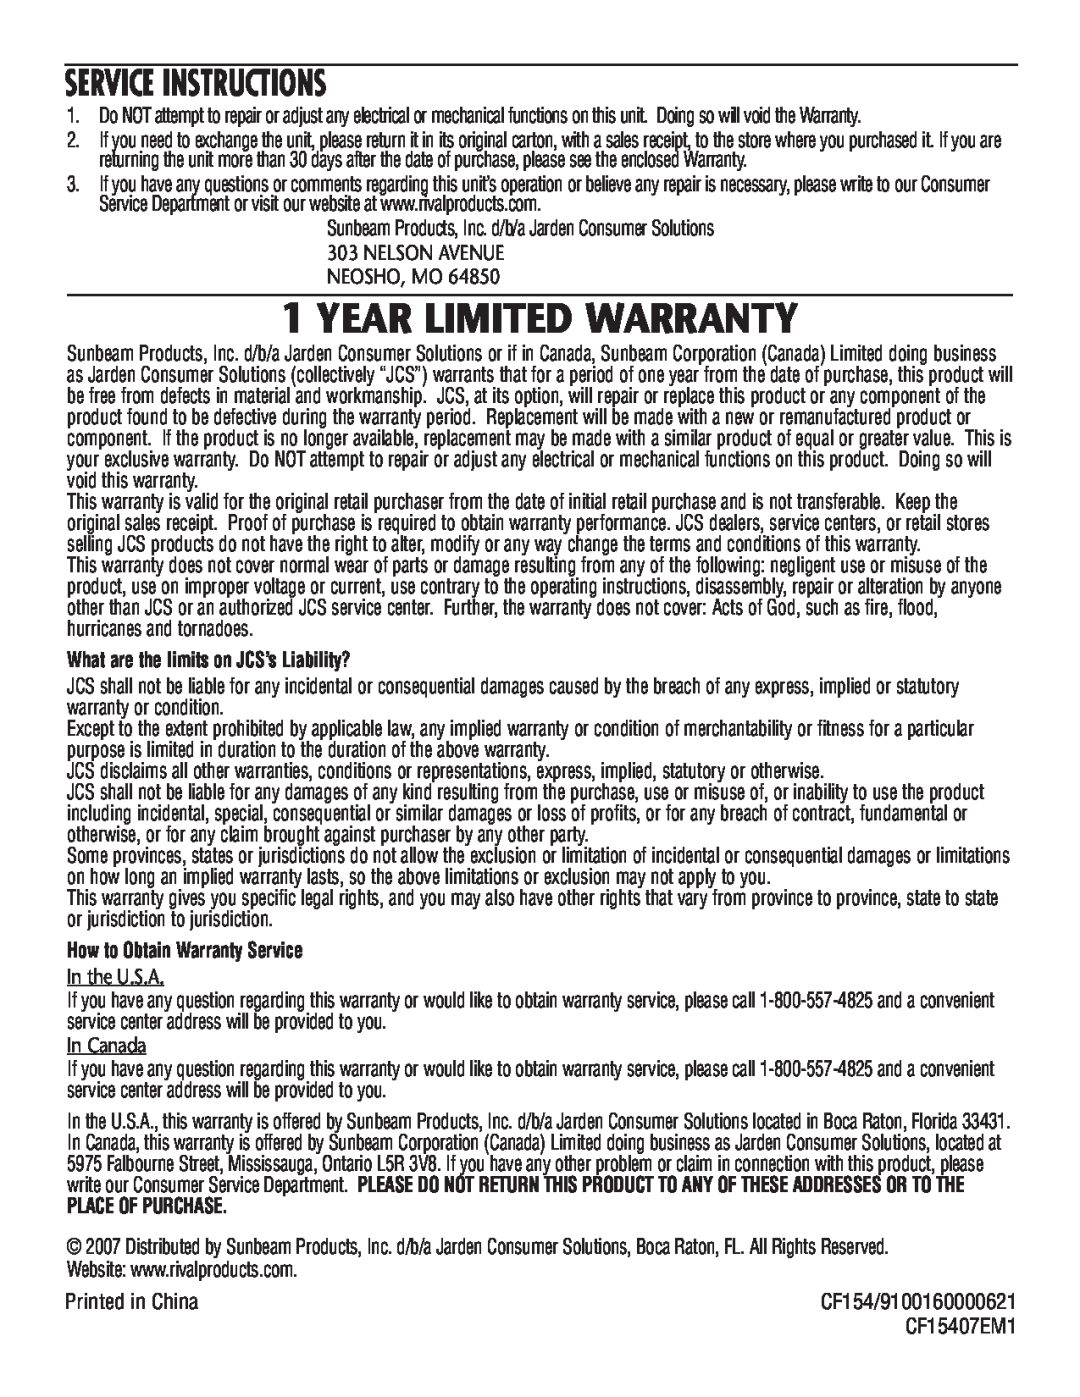 Rival CF154 manual Service Instructions, Year Limited Warranty, What are the limits on JCS’s Liability?, Place Of Purchase 